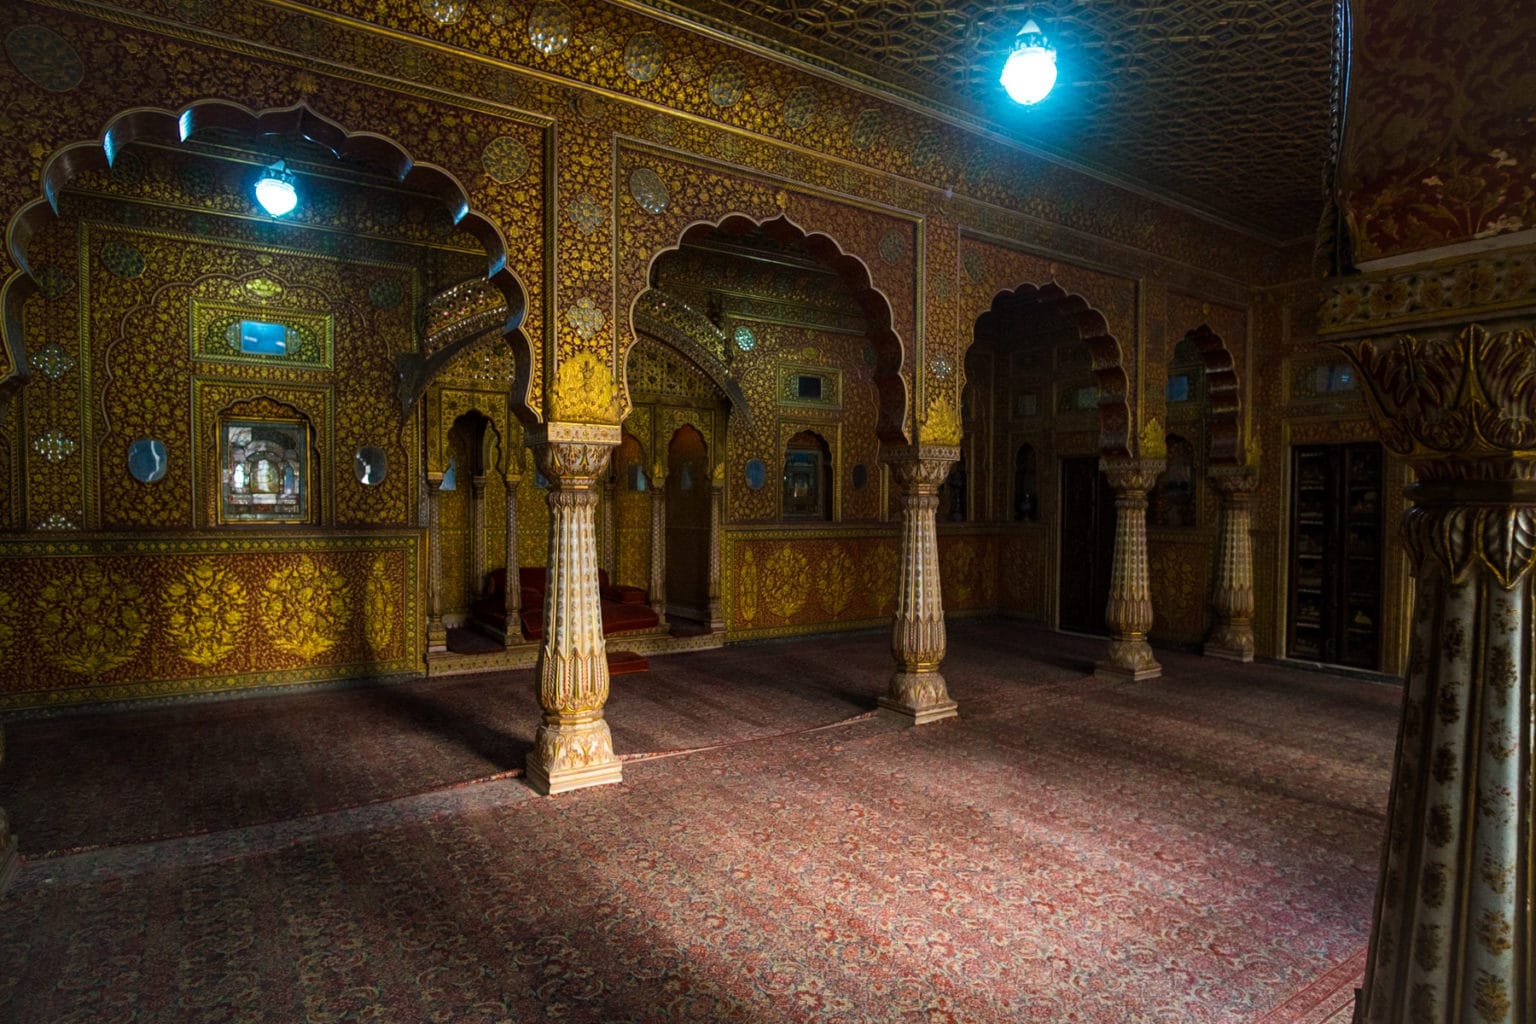 Gold leaf work at the Amar Mahal in Junaghad.